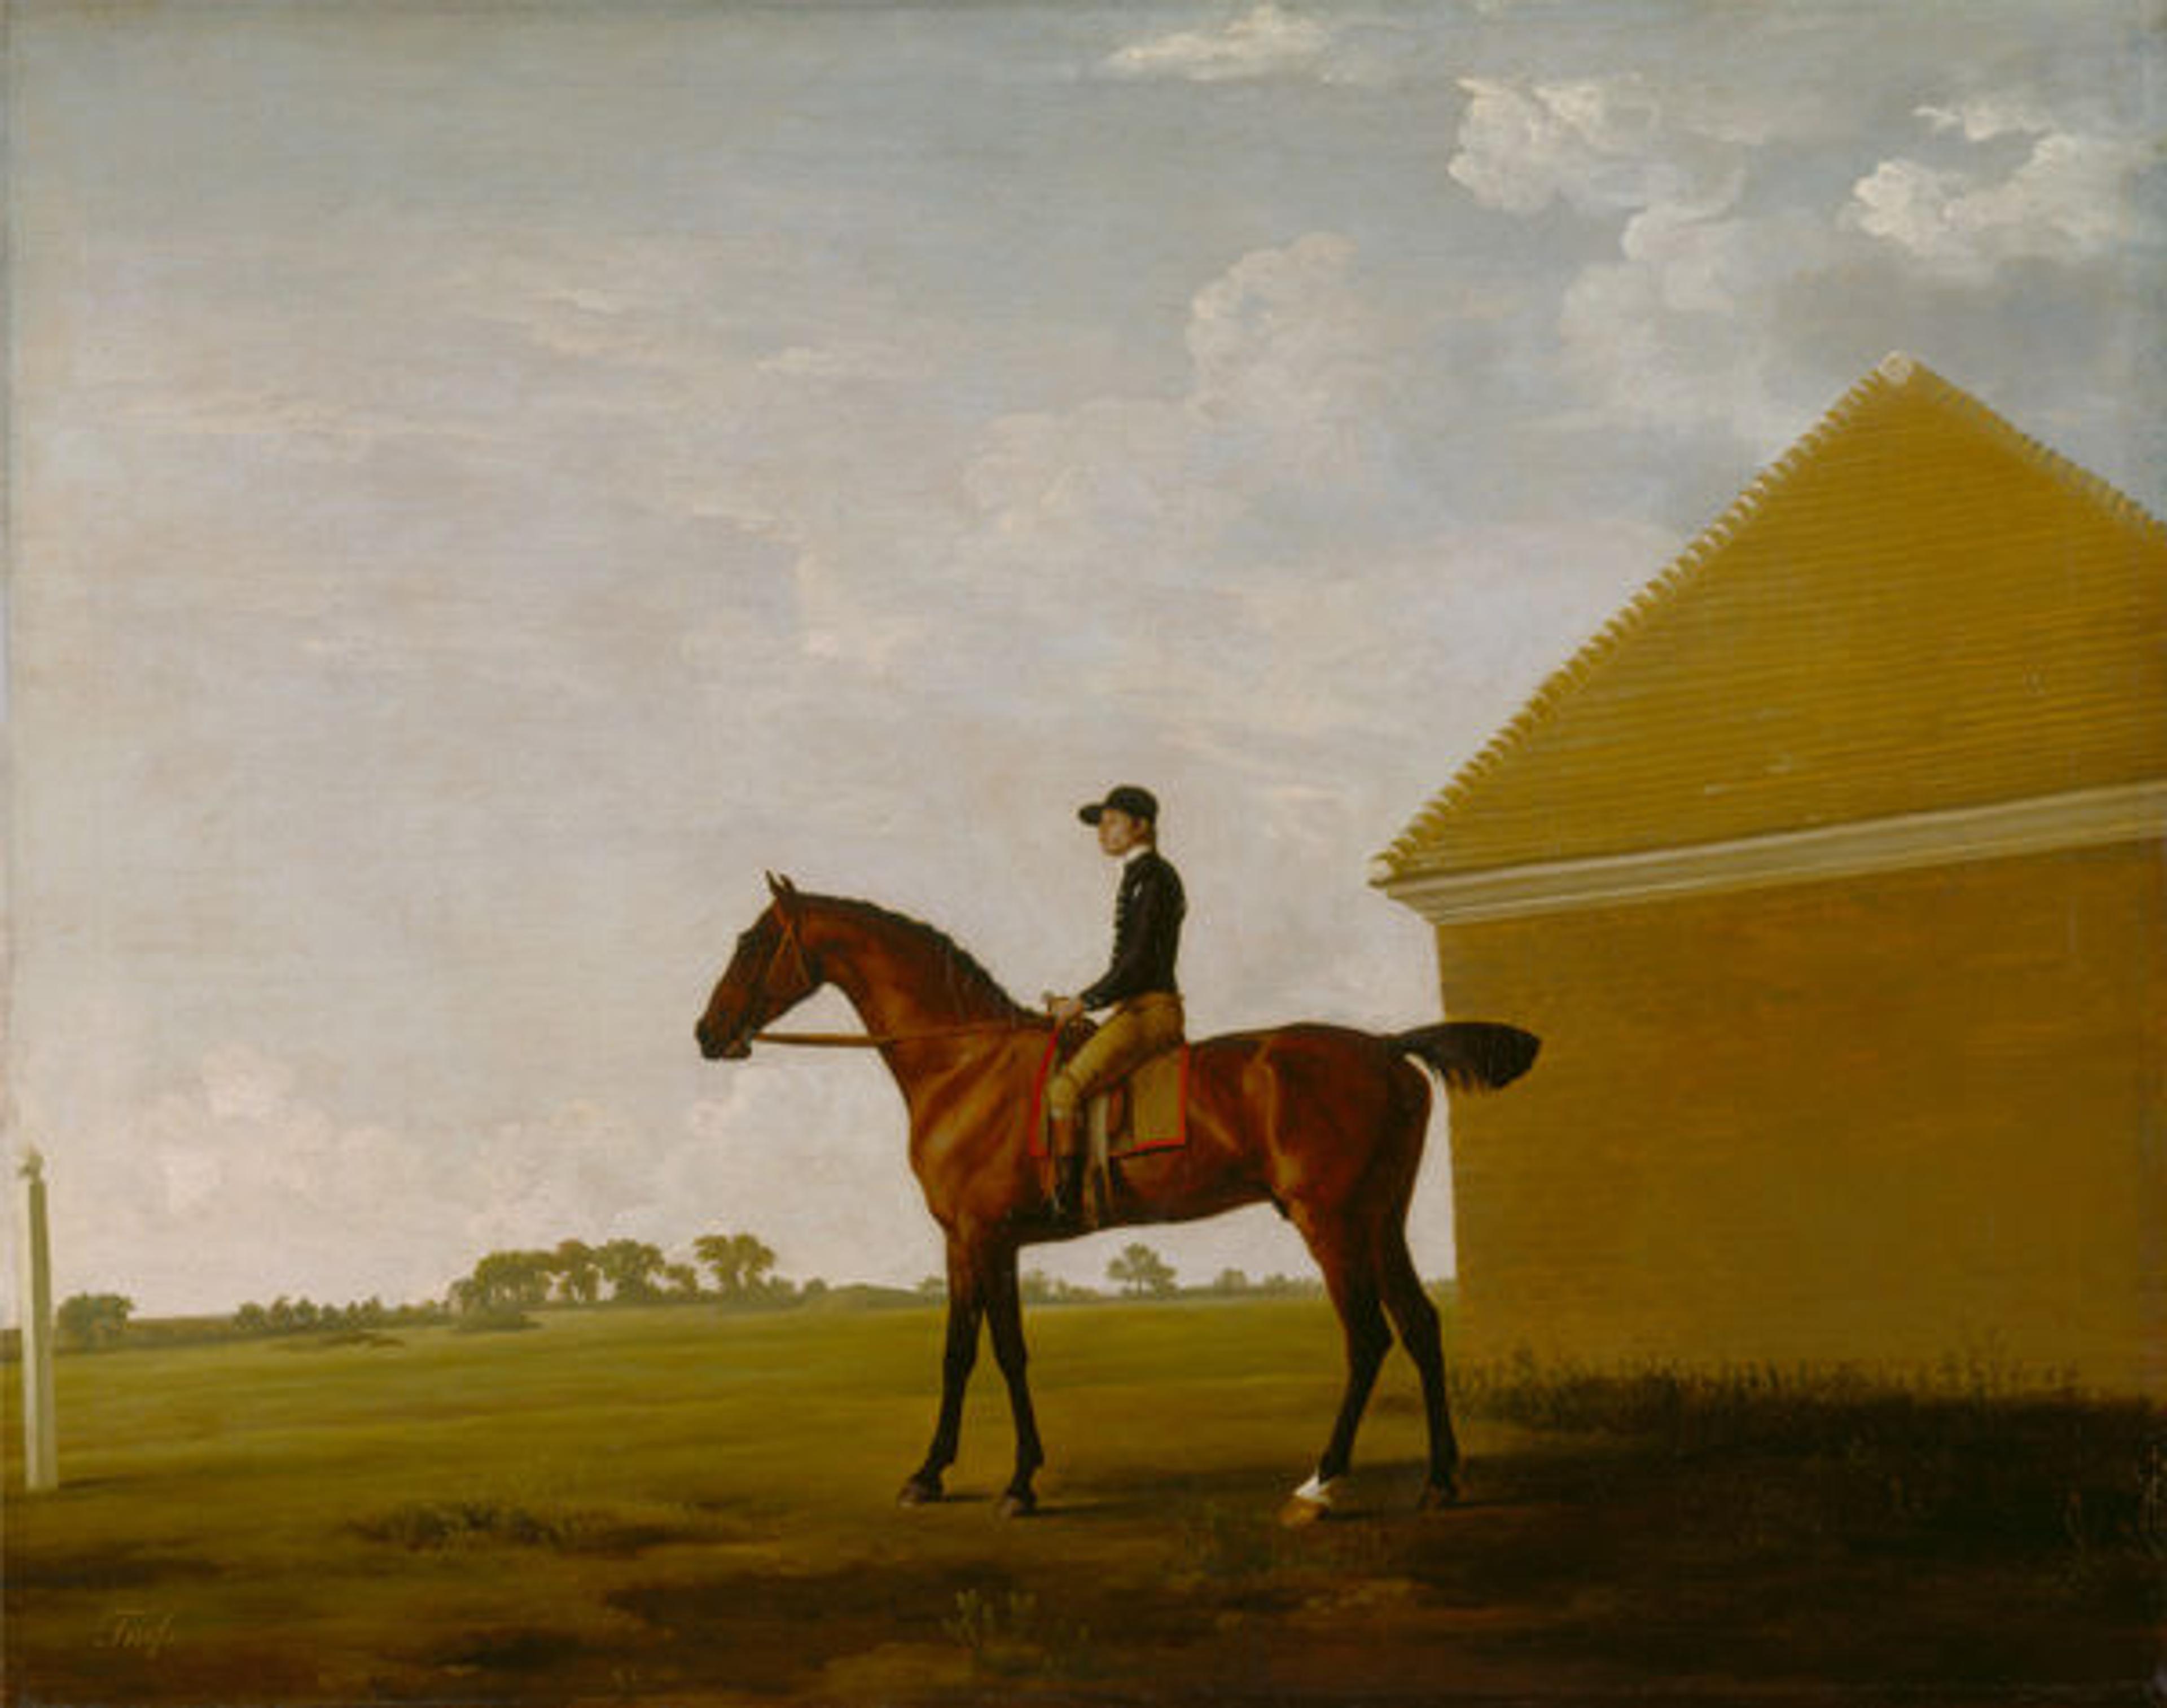 George Stubbs (British, 1724–1806). Turf, with Jockey up, at Newmarket, ca. 1765. Oil on canvas; 38 x 49 in. (96.5 x 124.5 cm). Yale Center for British Art, Paul Mellon Collection